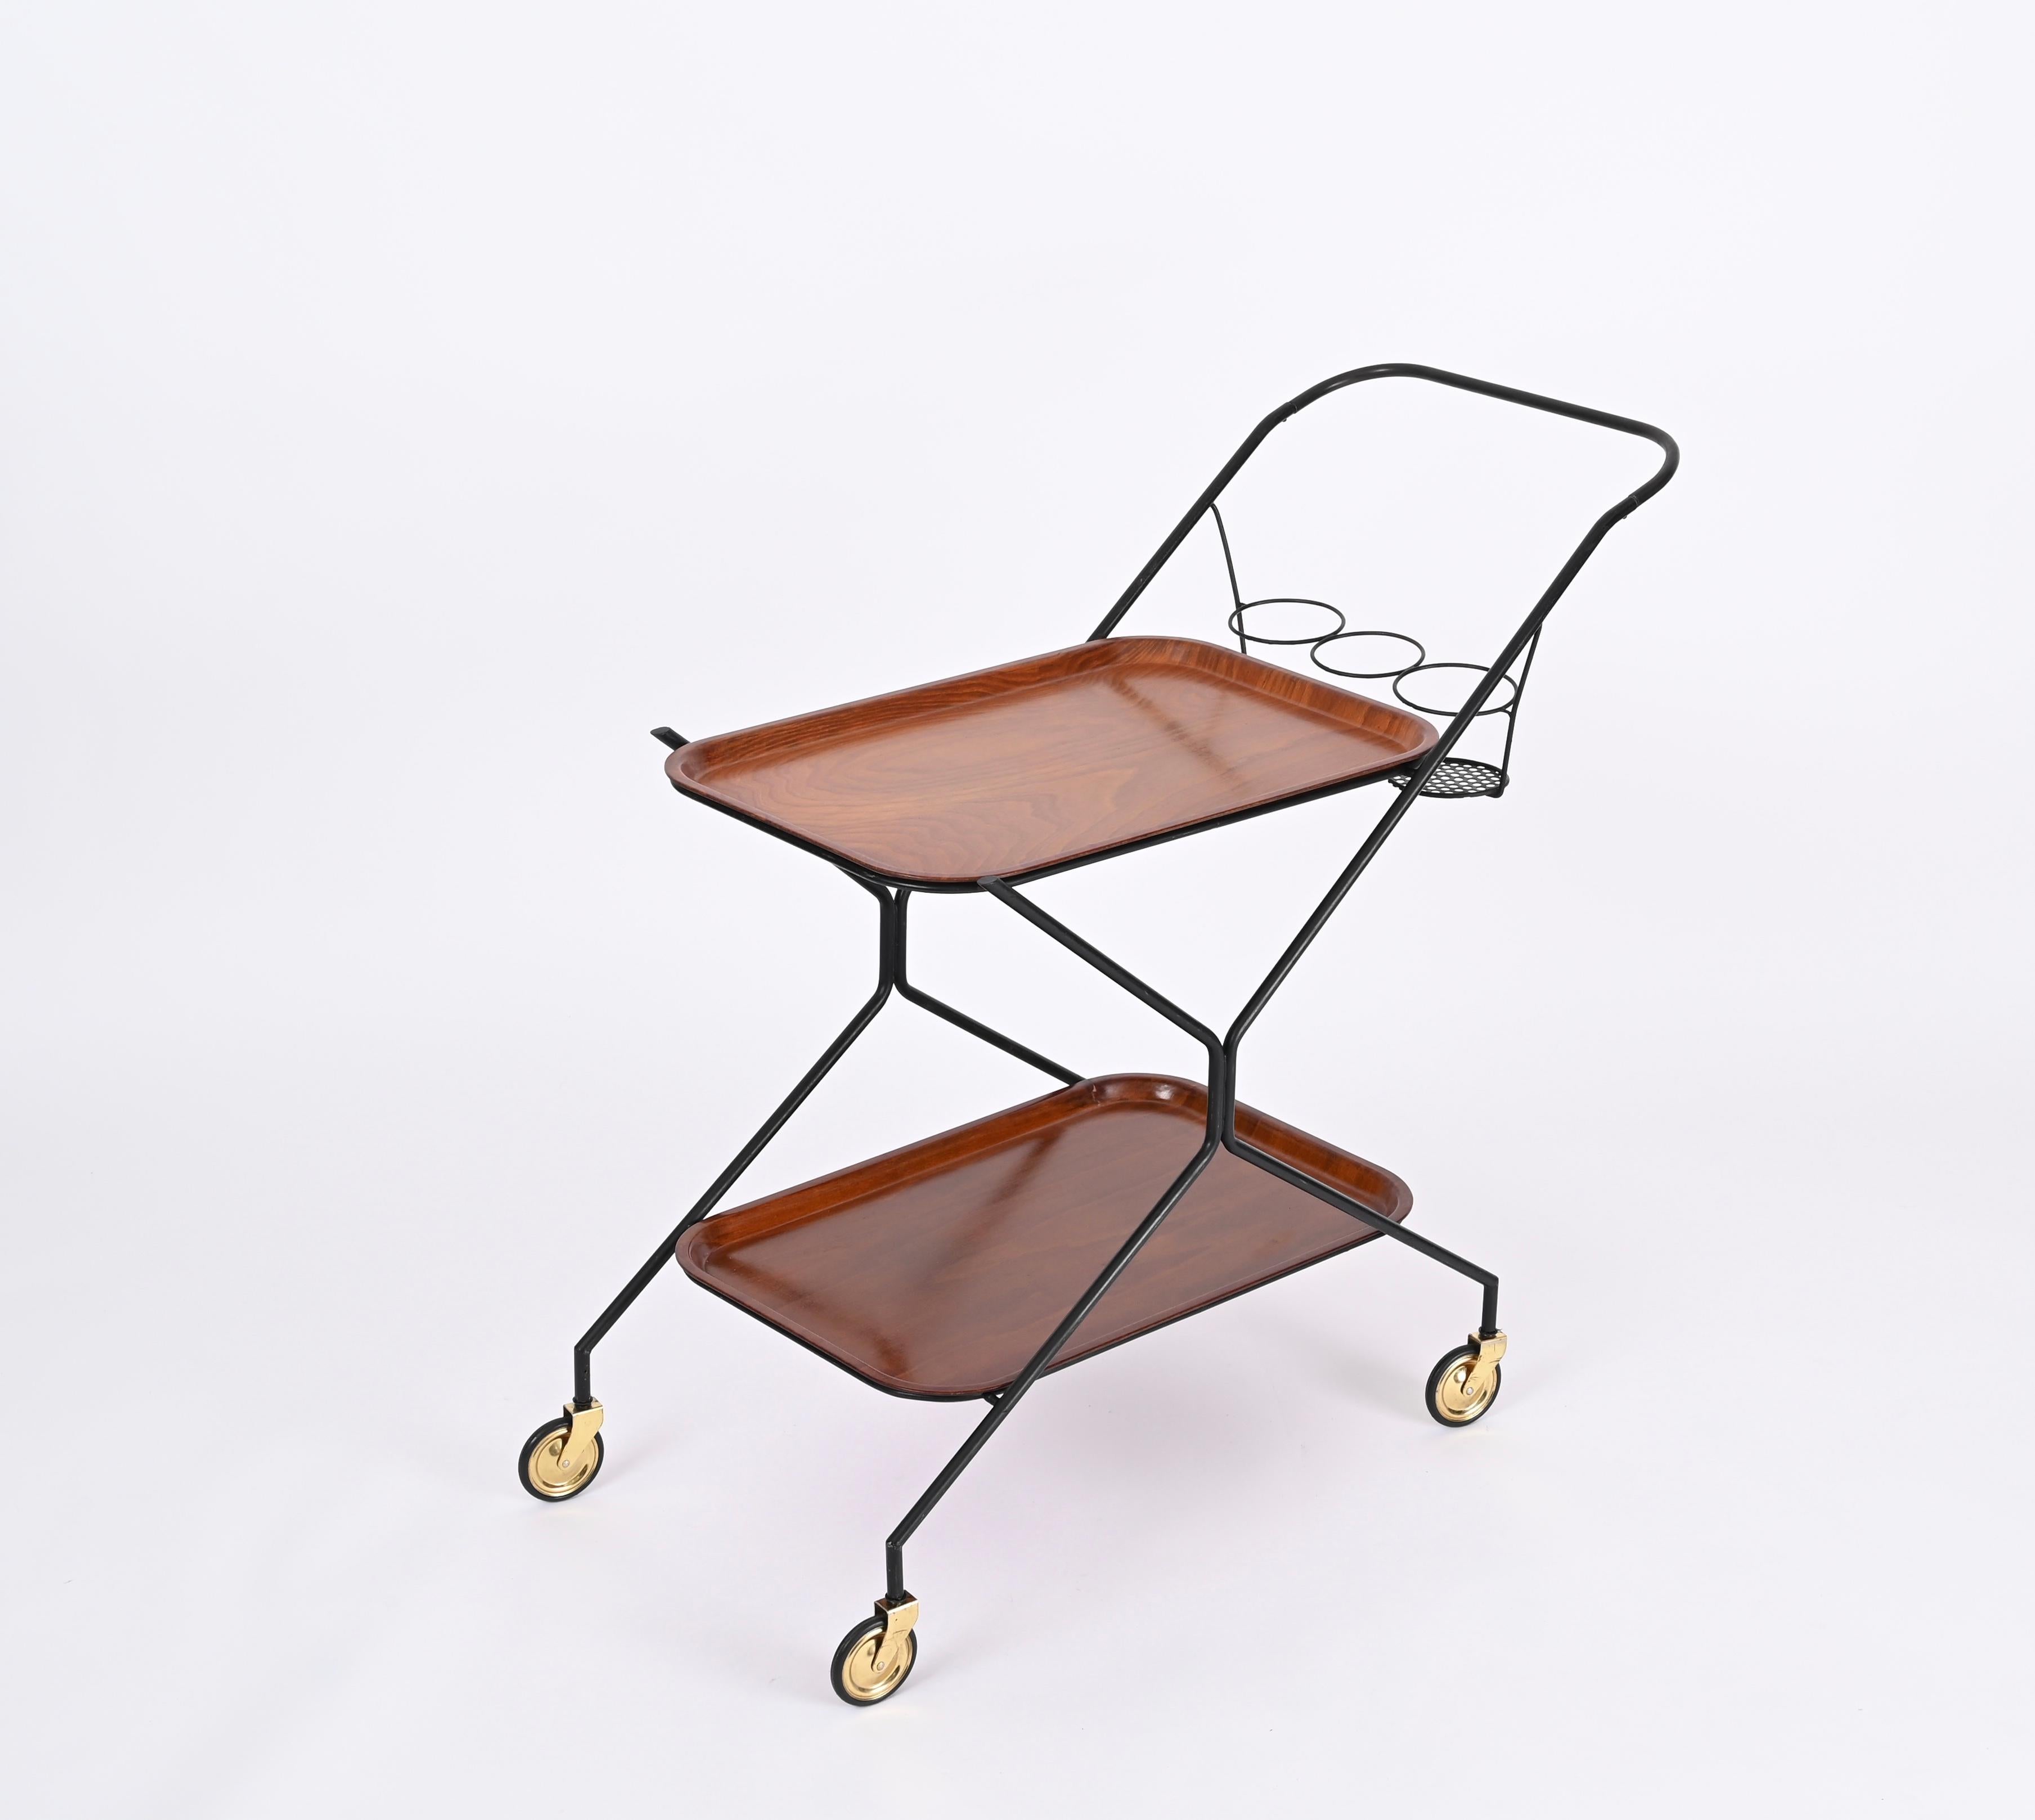 Italian Serving Bar Cart with Bottle Holder, Wood, Metal and Brass, Italy, 1960s For Sale 2